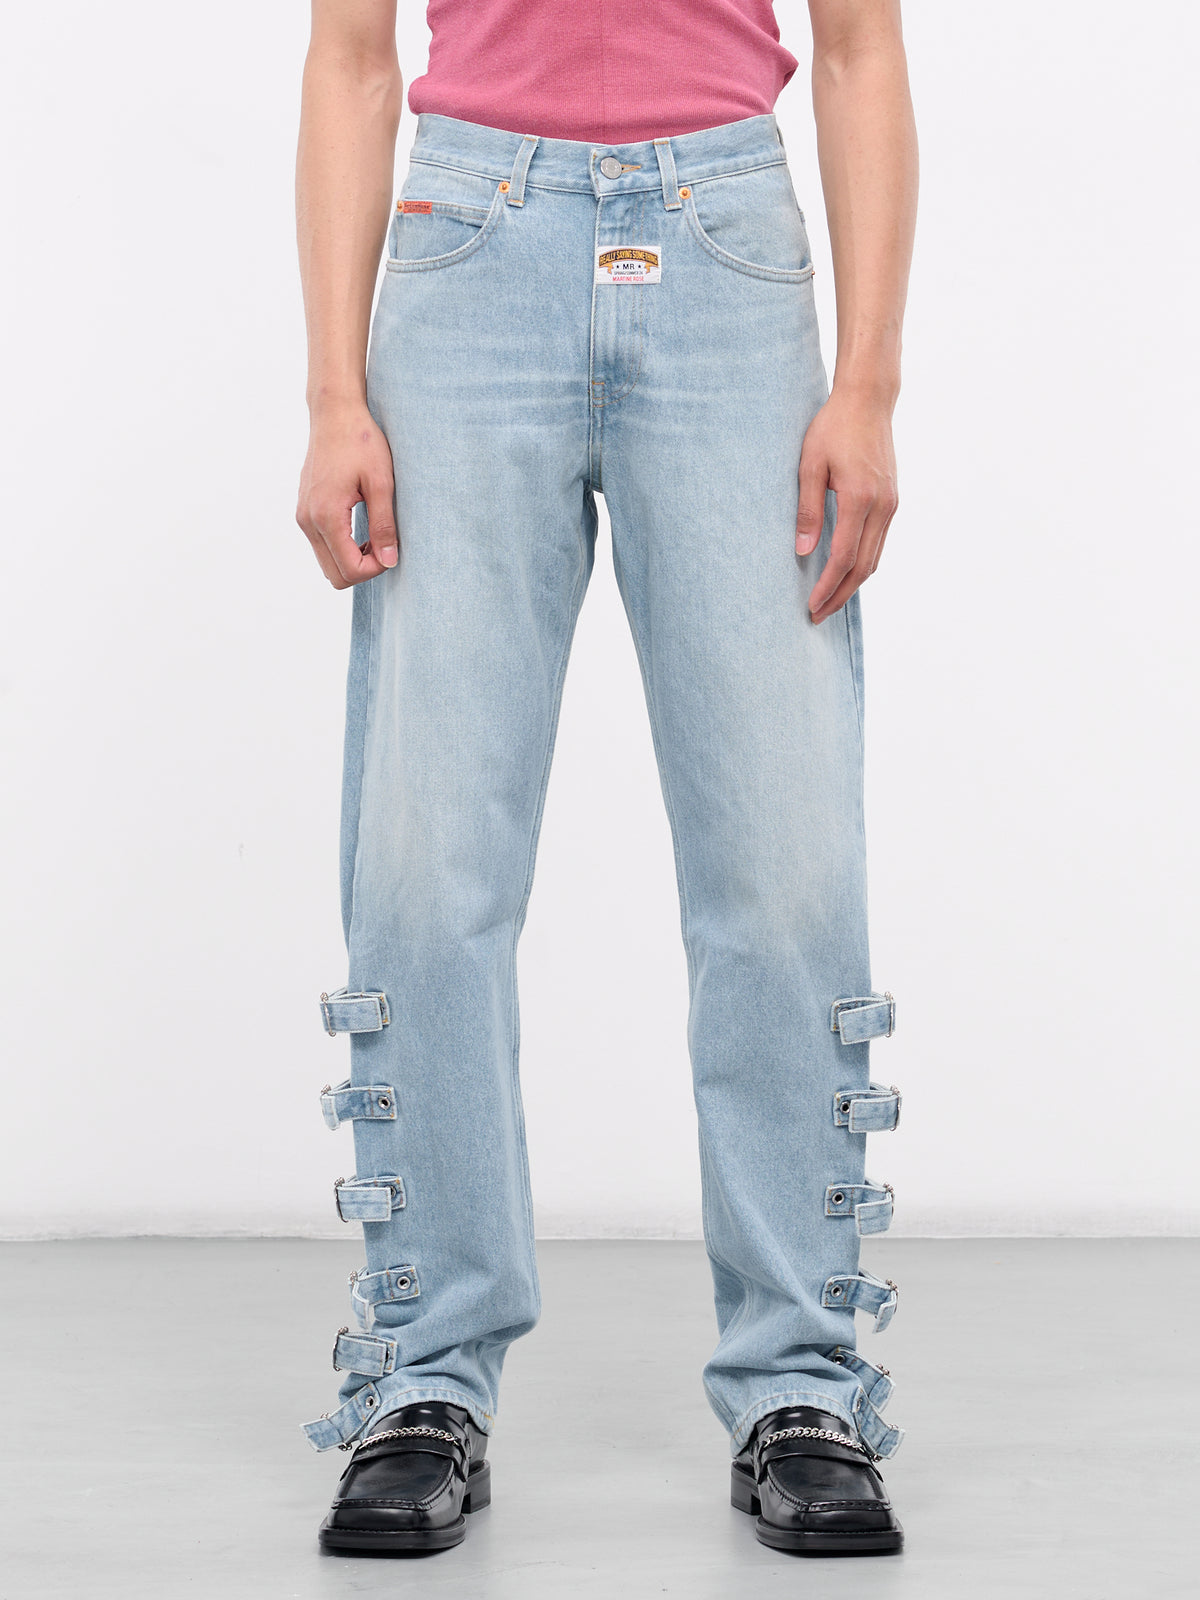 Buckle Jeans (234-BLEACHED-WASH)